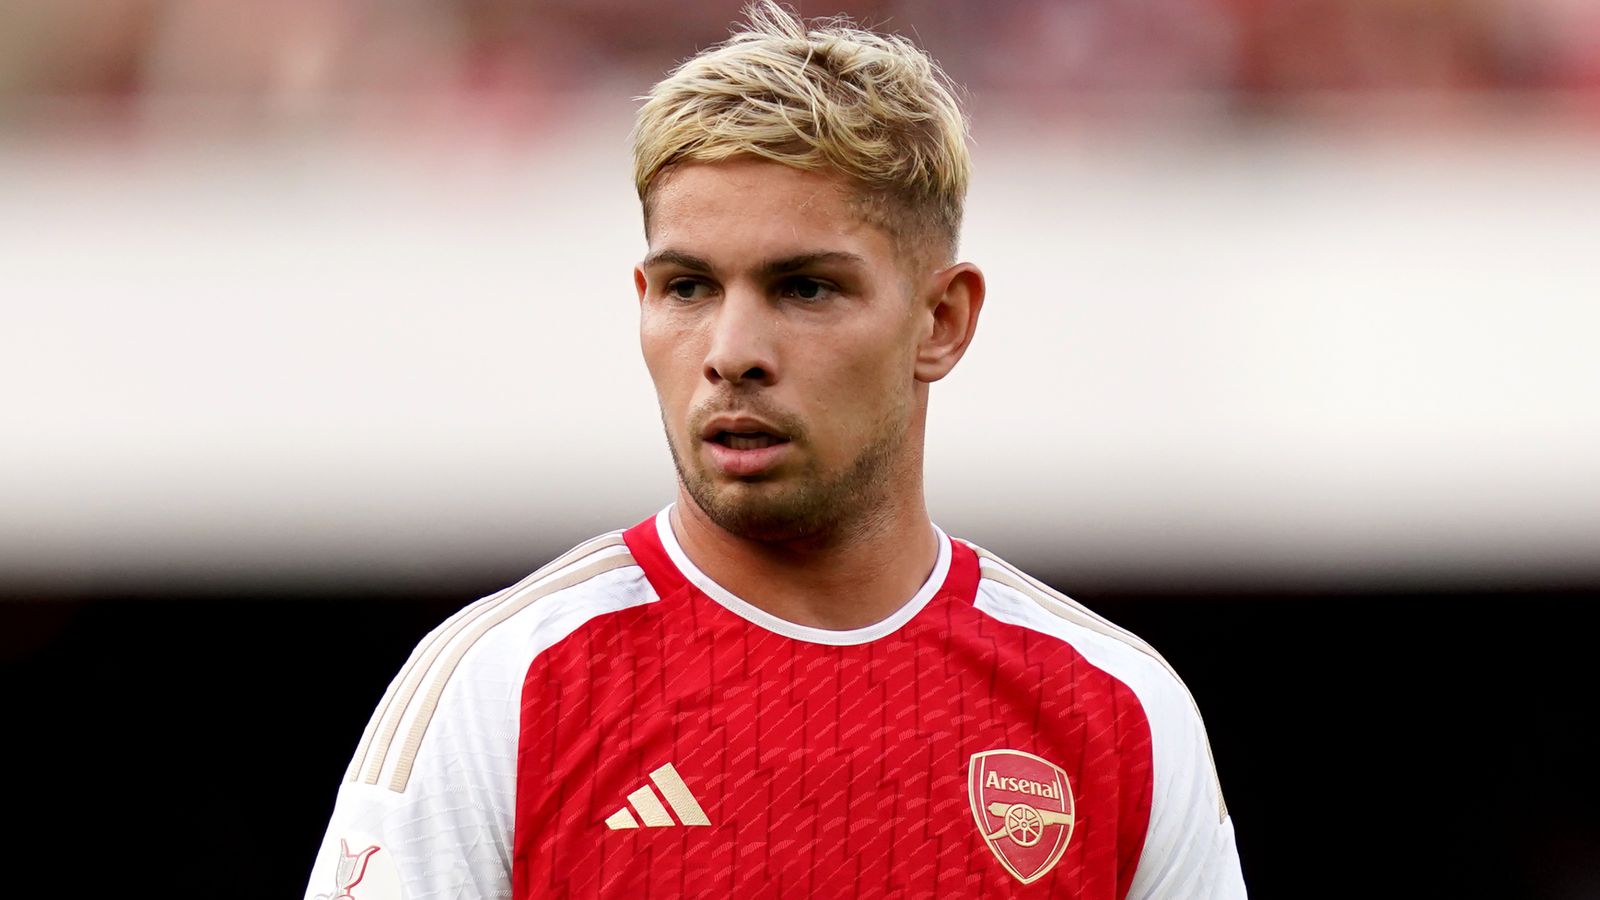 Fulham complete club-record deal for Arsenal midfielder Smith Rowe